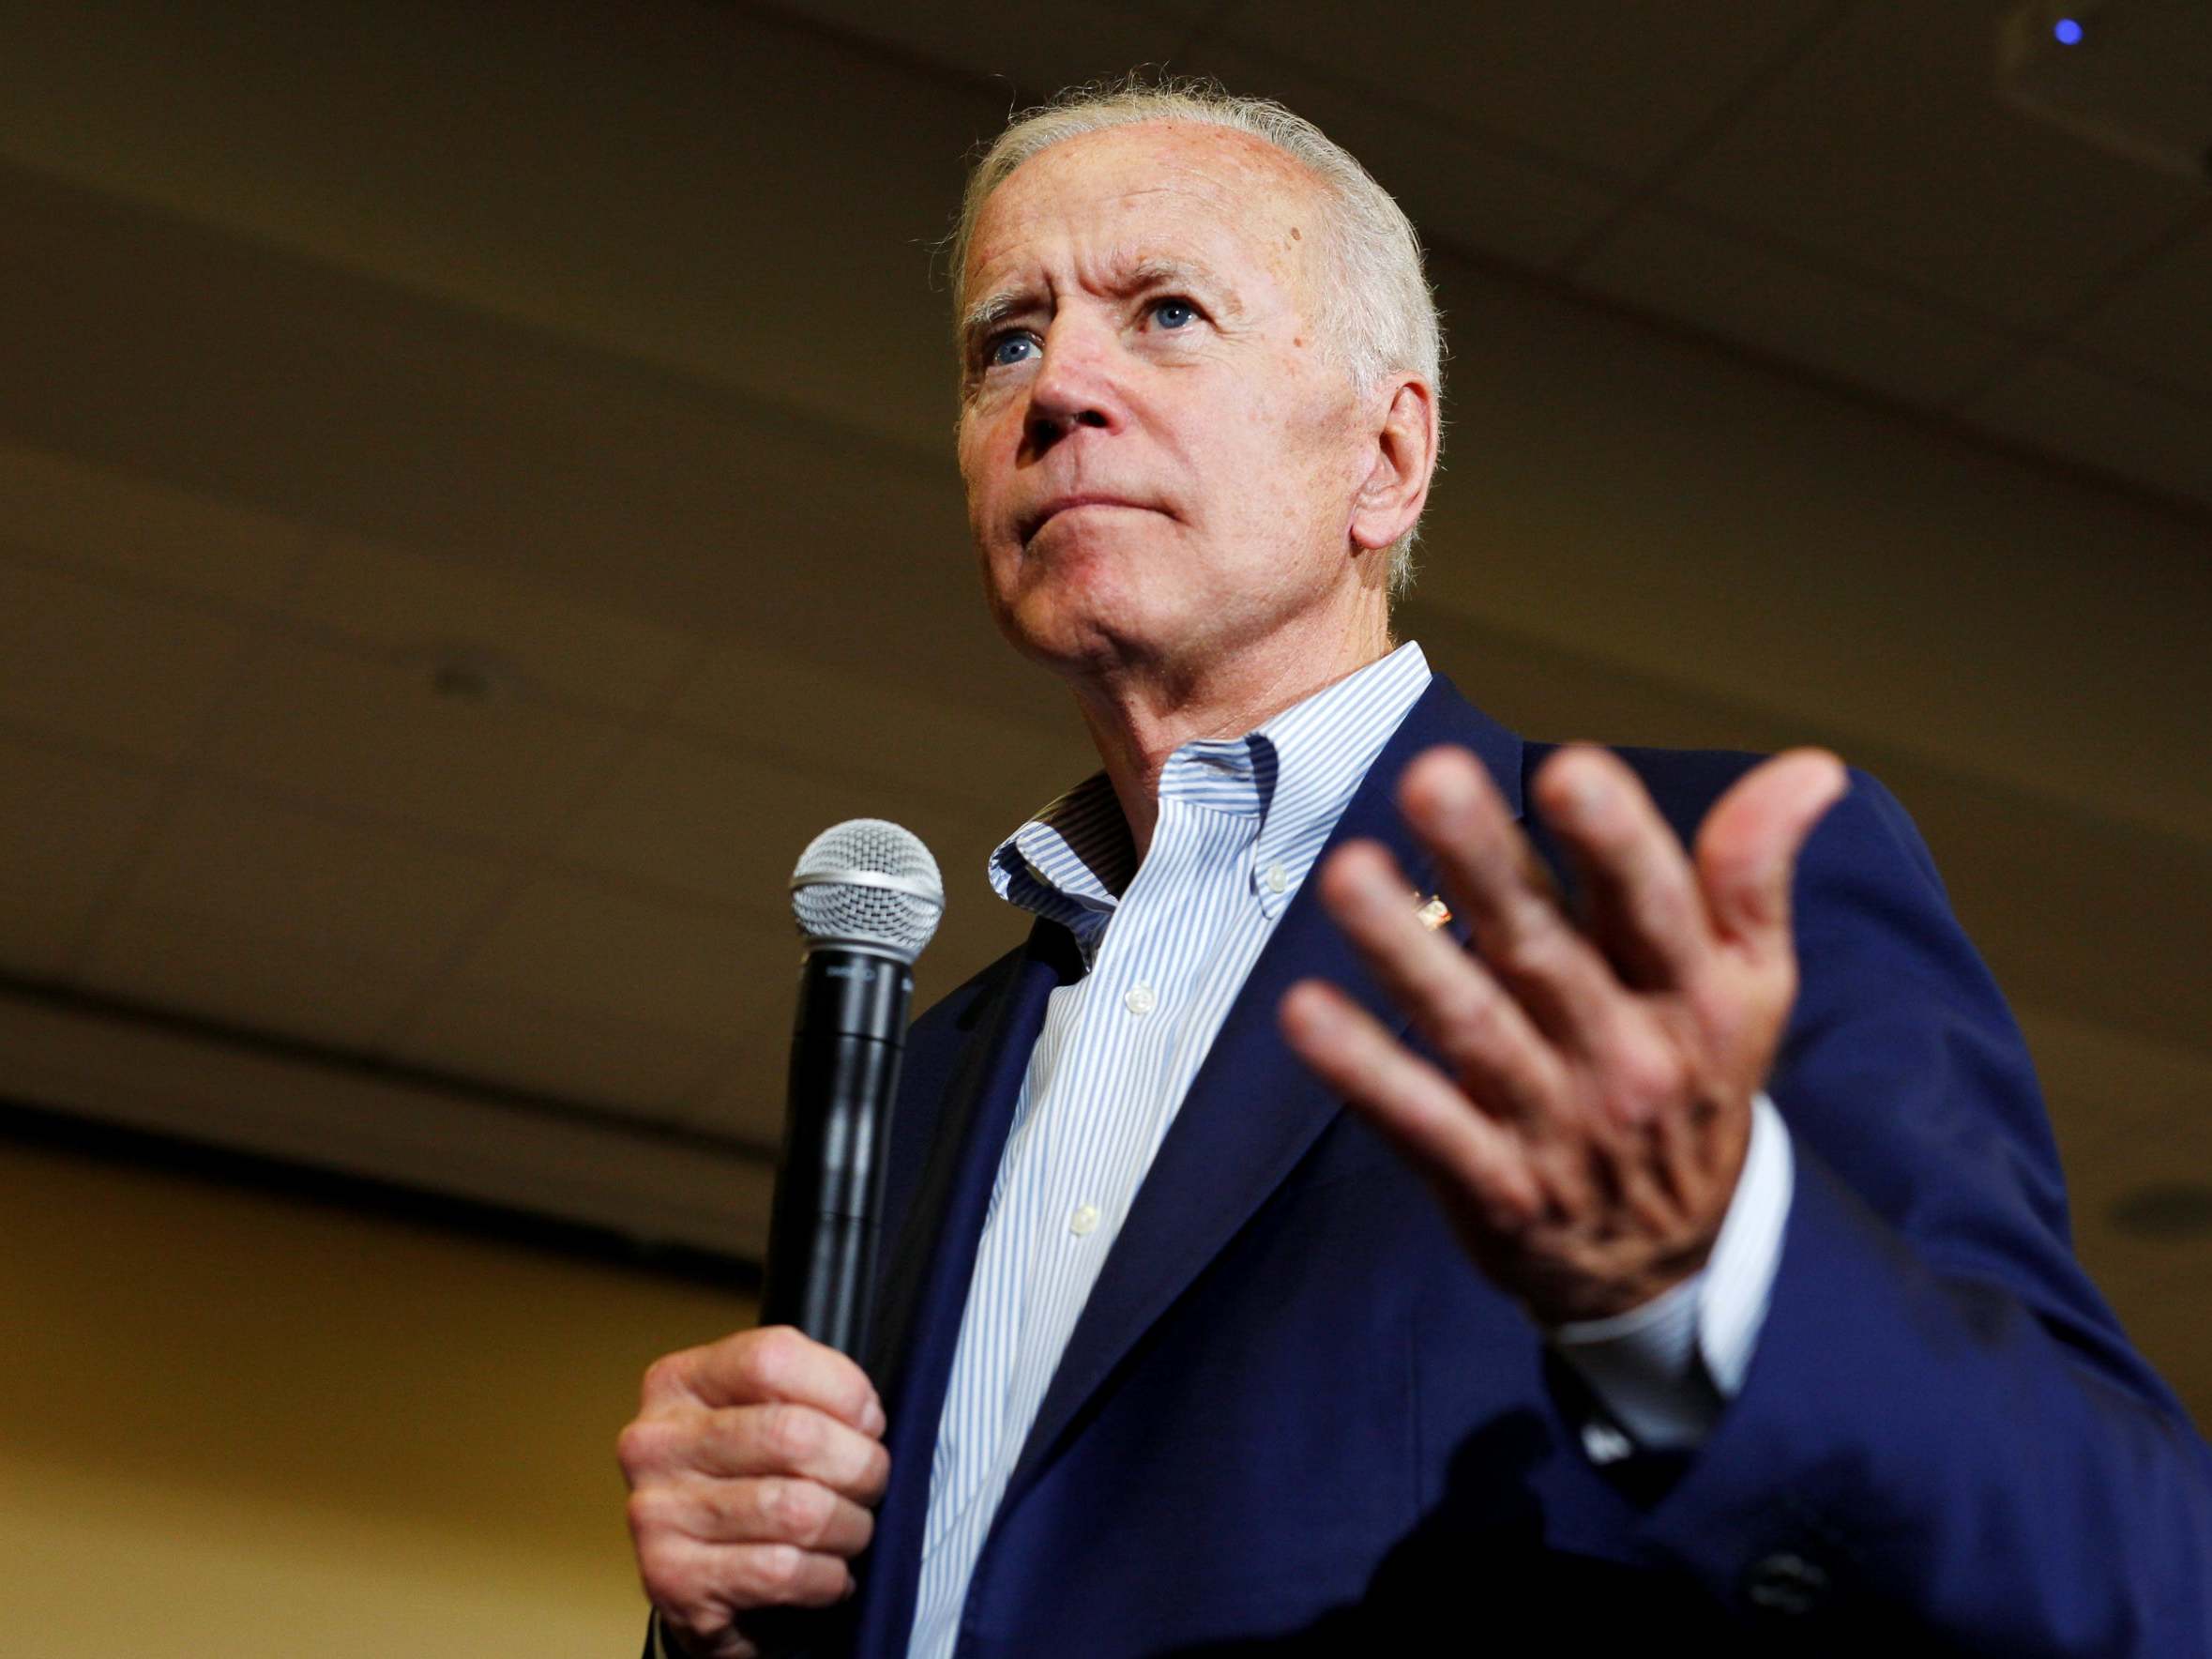 Mr Biden made the remarks at a fundraising event in the billionaire-packed Seattle suburb of Medina